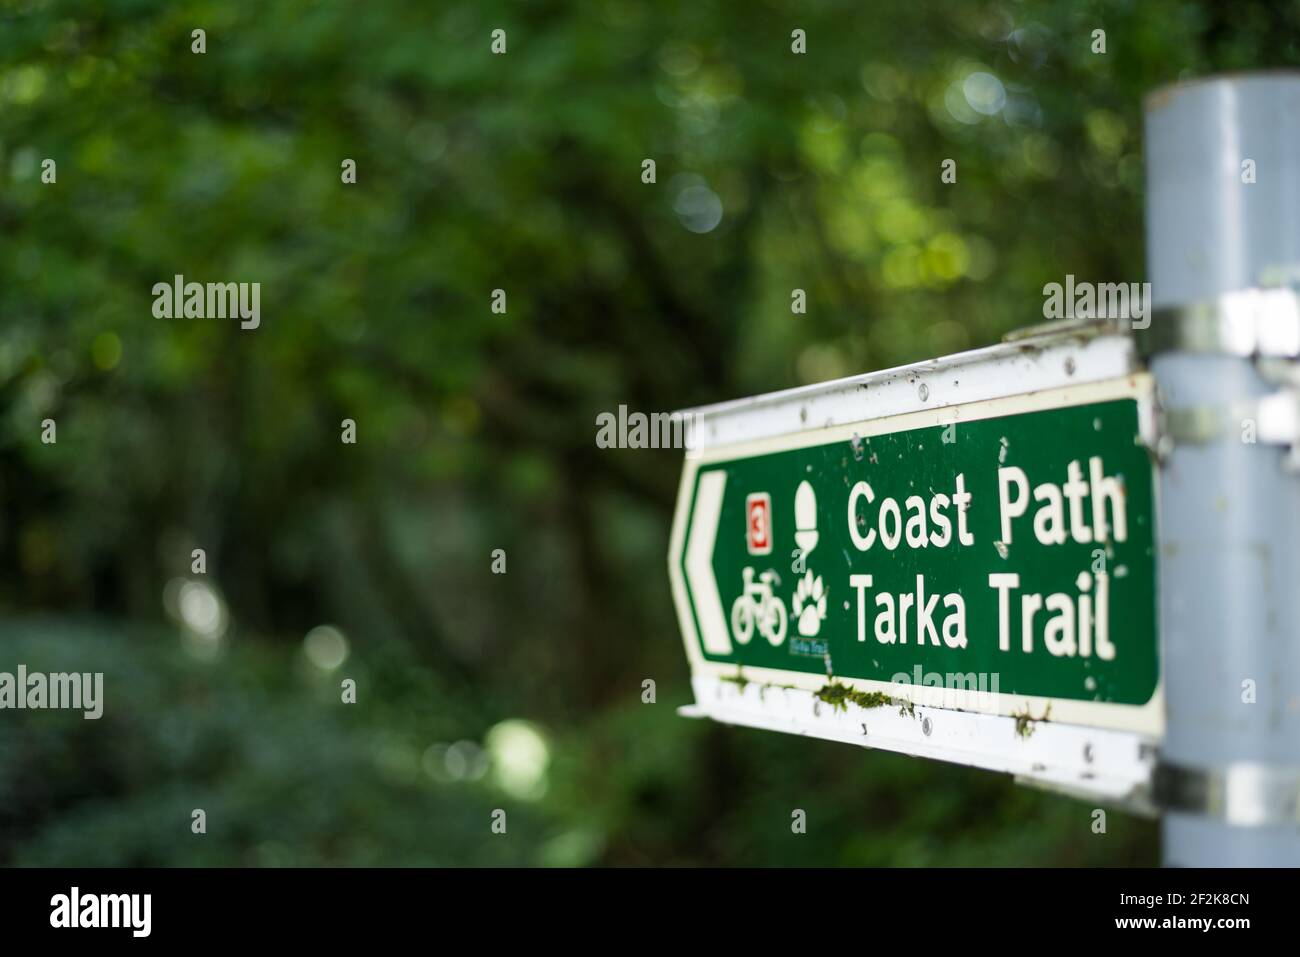 Signpost on the Tarka Trail footpath and cyclepath on the South West Coast Path at Fremington, Devon, UK. Stock Photo